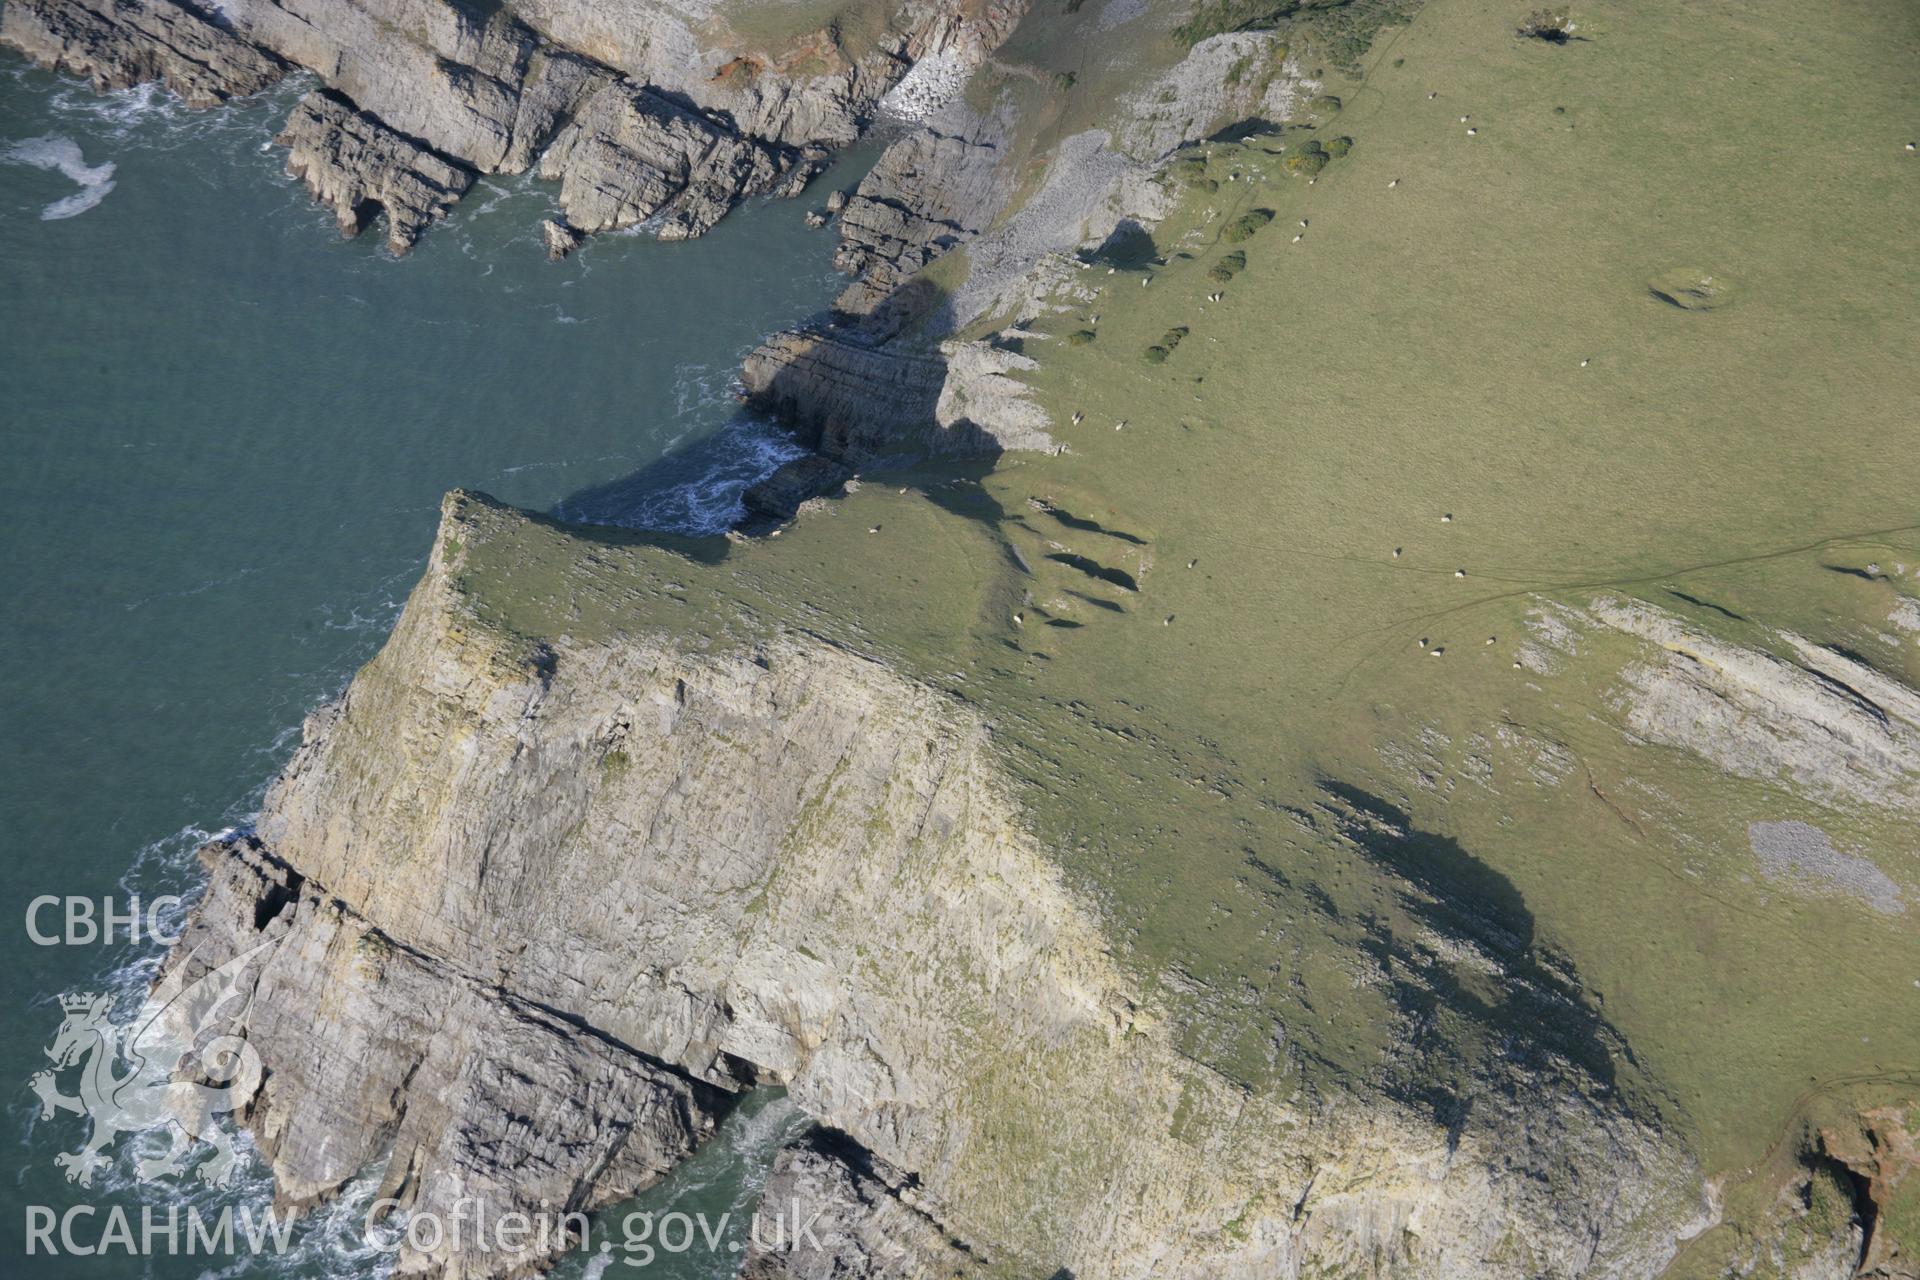 RCAHMW colour oblique aerial photograph of Horse Cliff Promontory Fort, viewed from the south. Taken on 26 January 2006 by Toby Driver.